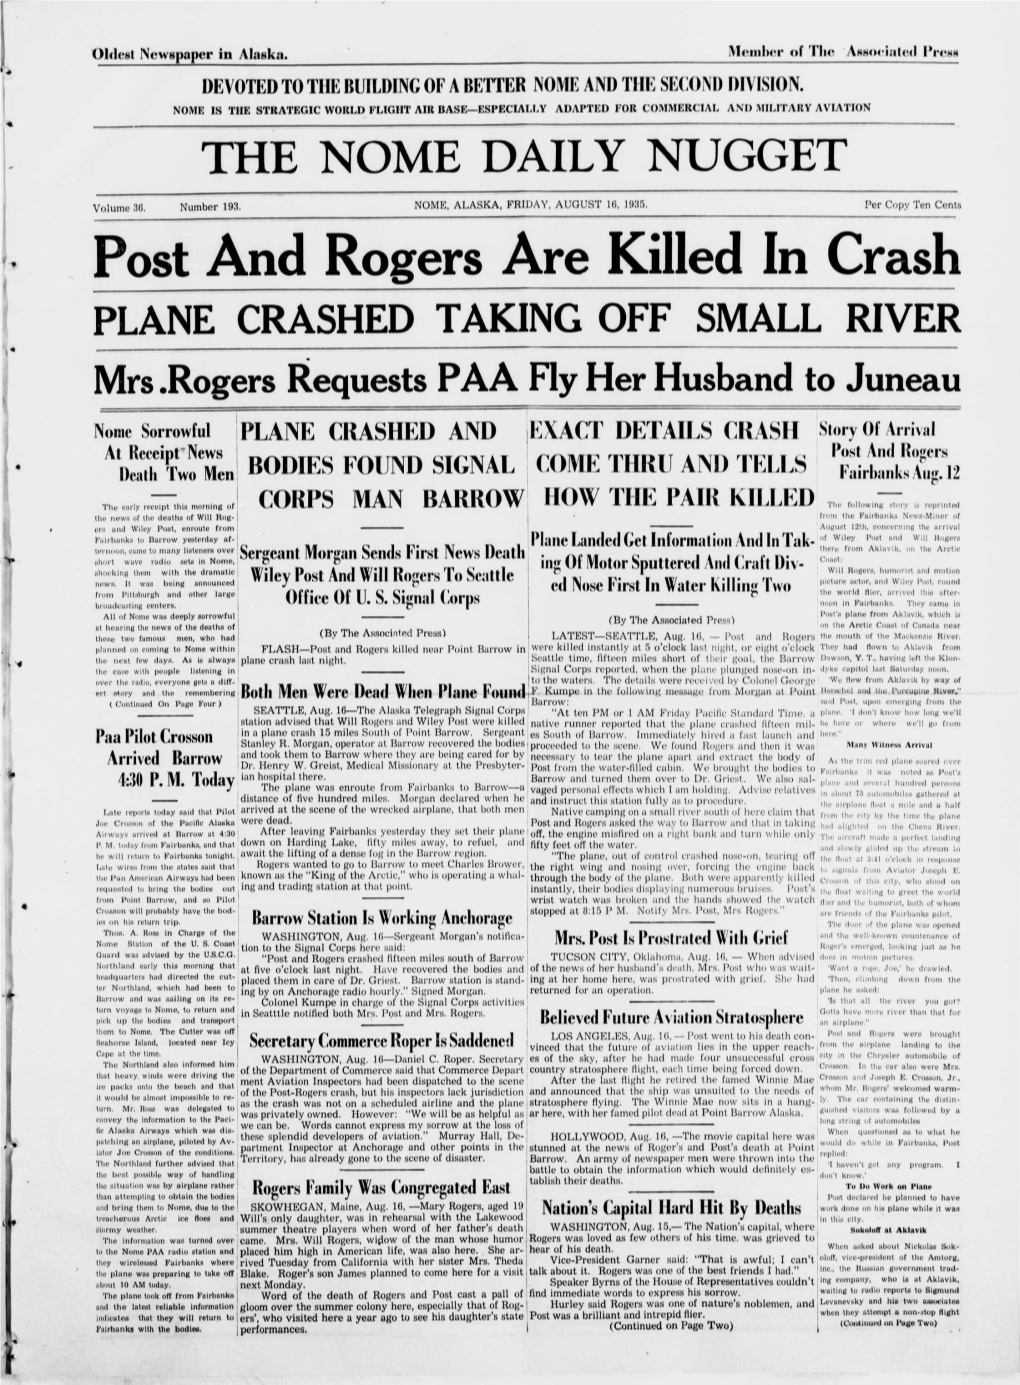 Post and Rogers Are Killed in Crash PLANE CRASHED TAKING OFF SMALL RIVER Mrs .Rogers Requests PAA Fly Her Husband to Juneau